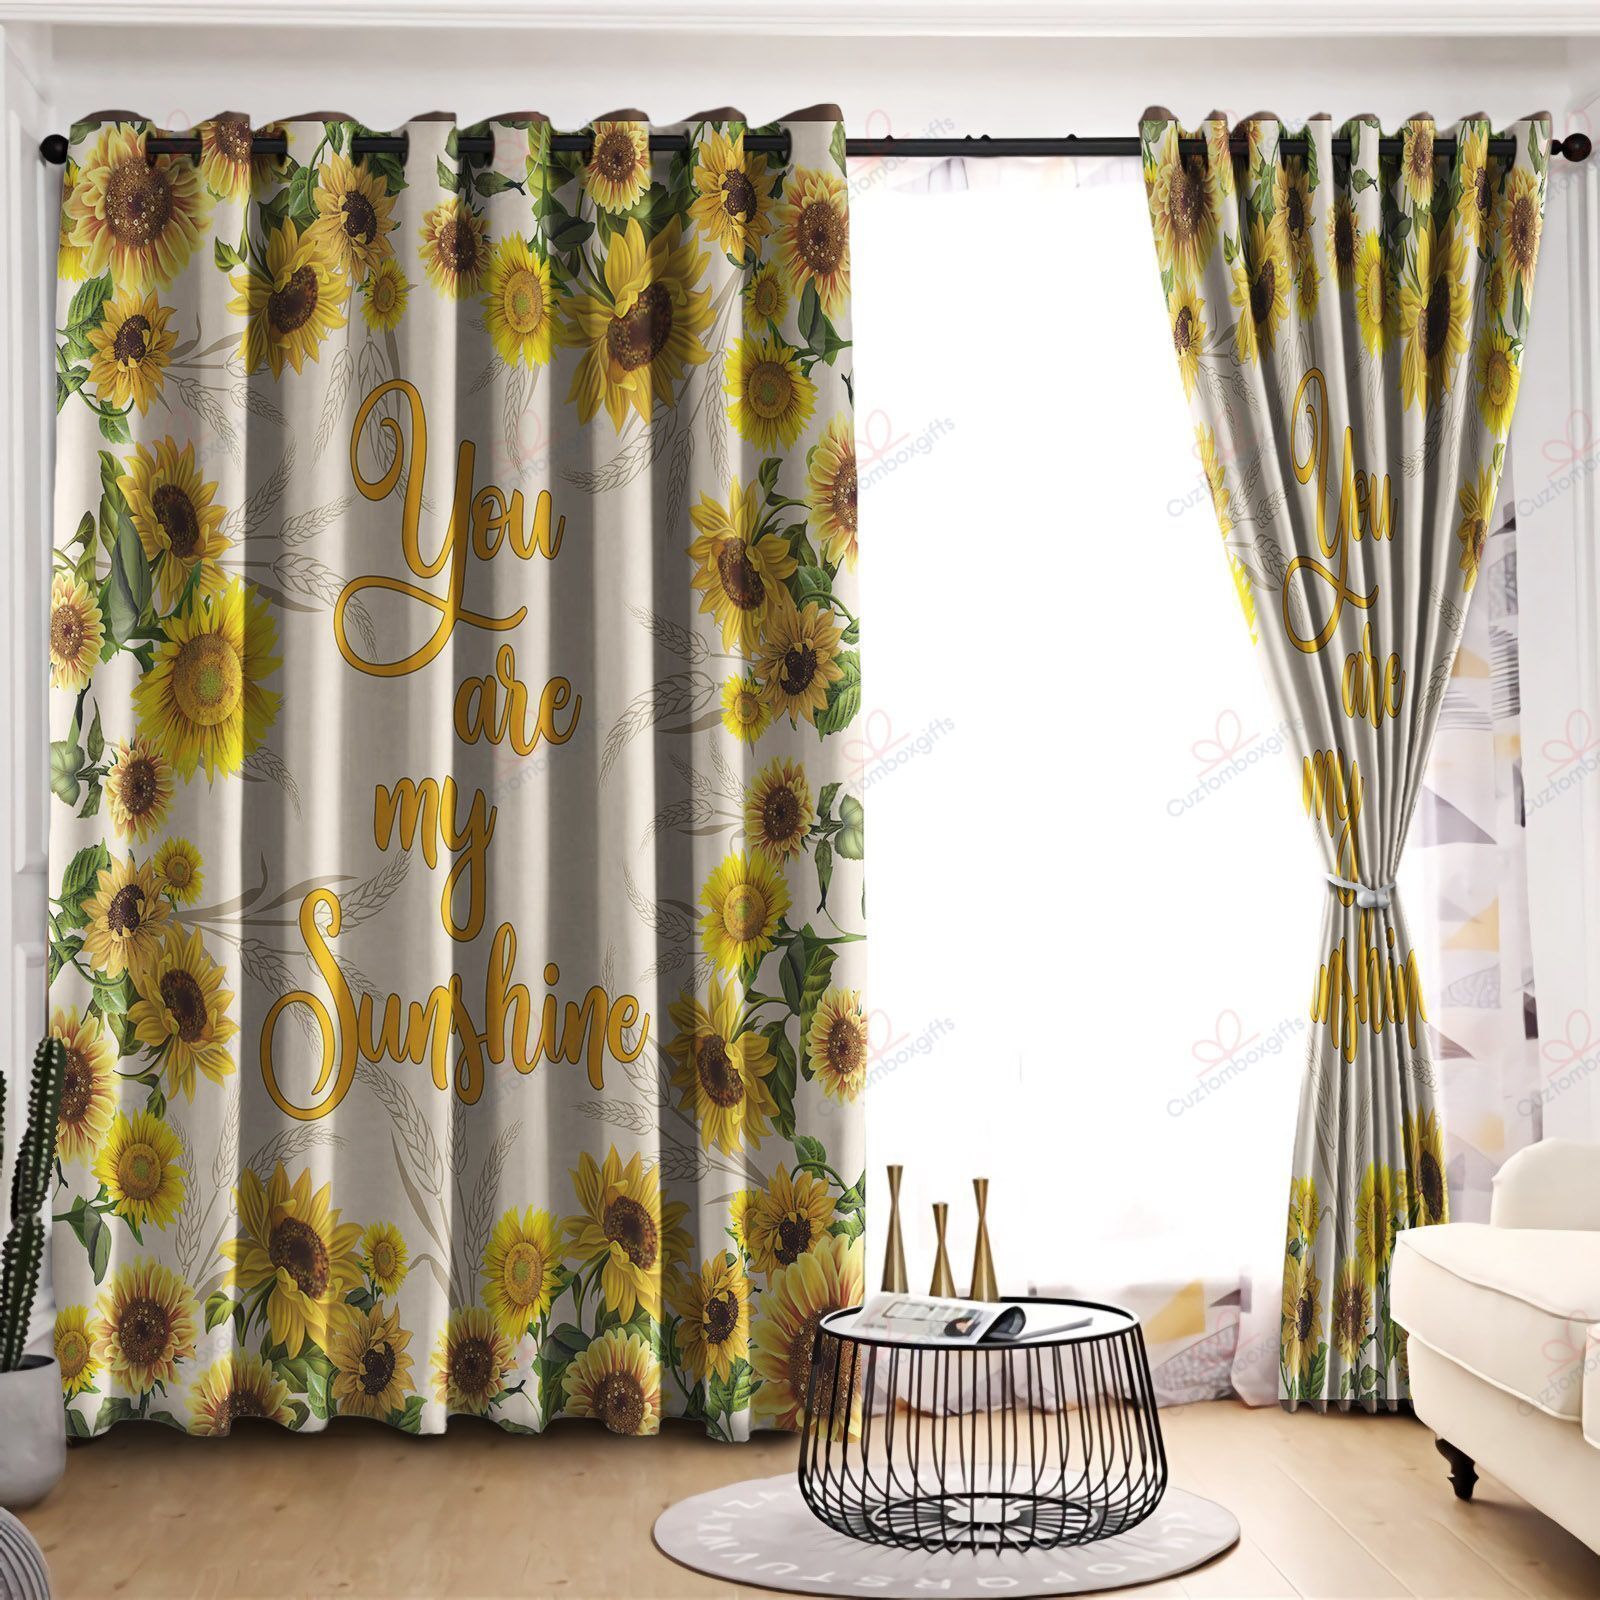 Sunflower And Barley Printed Window Curtains Home Decor